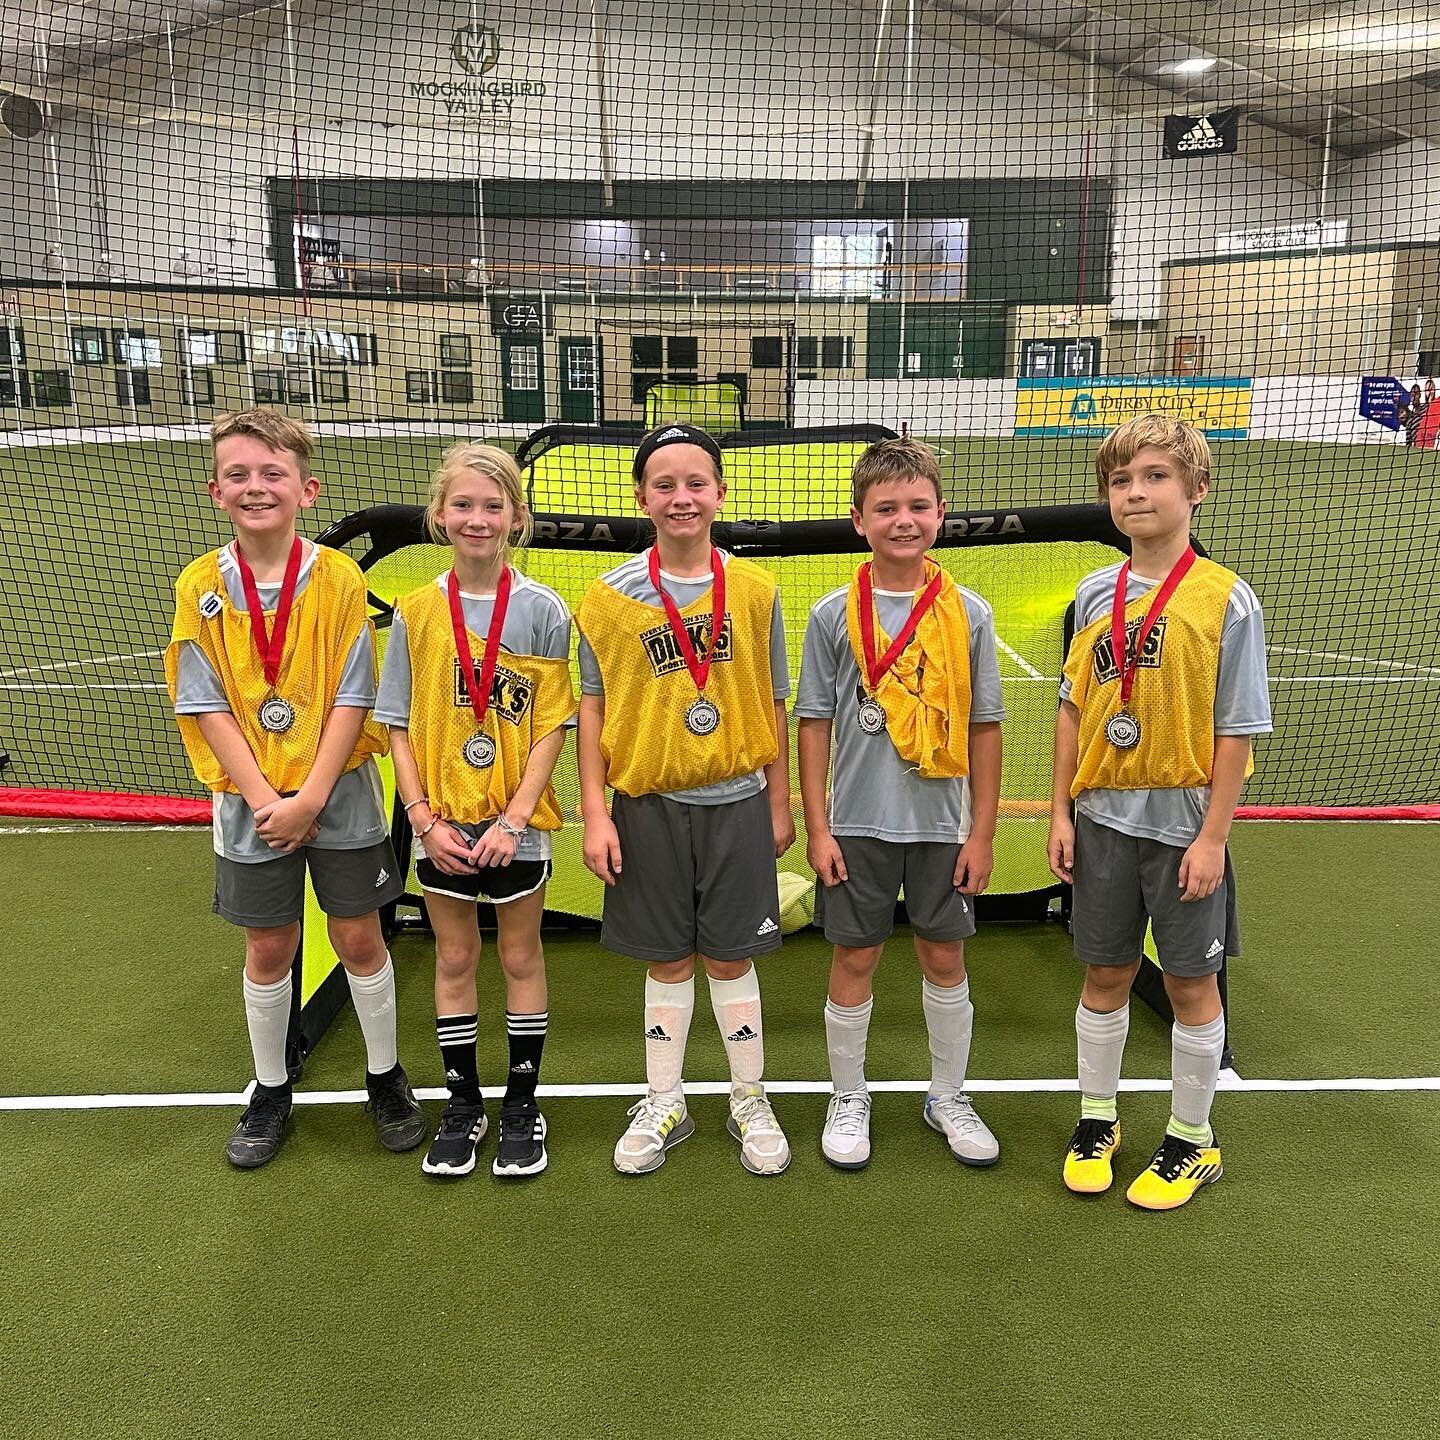 Congratulations to Japan who were Finalists of our annual Black Friday 4v4 Inner Club Tournament in our 2011-2012 age division! #mvpremier #thegoldstandard